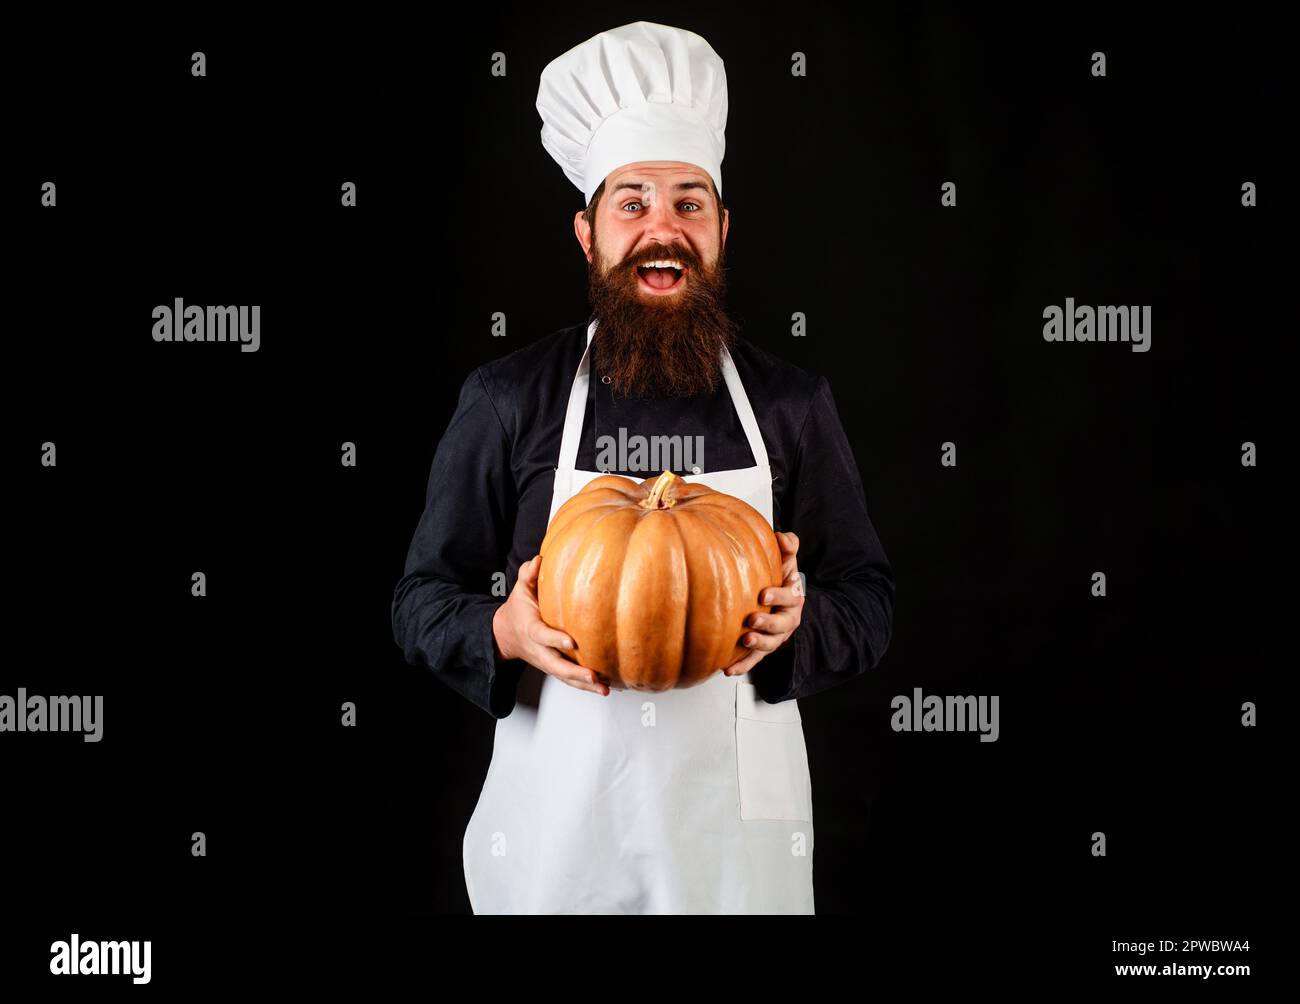 Autumn vegetables. Male cook in chef hat with pumpkin. Healthy vegetarian eating. Chef in uniform and white apron with squash. Diet food. Farm market Stock Photo